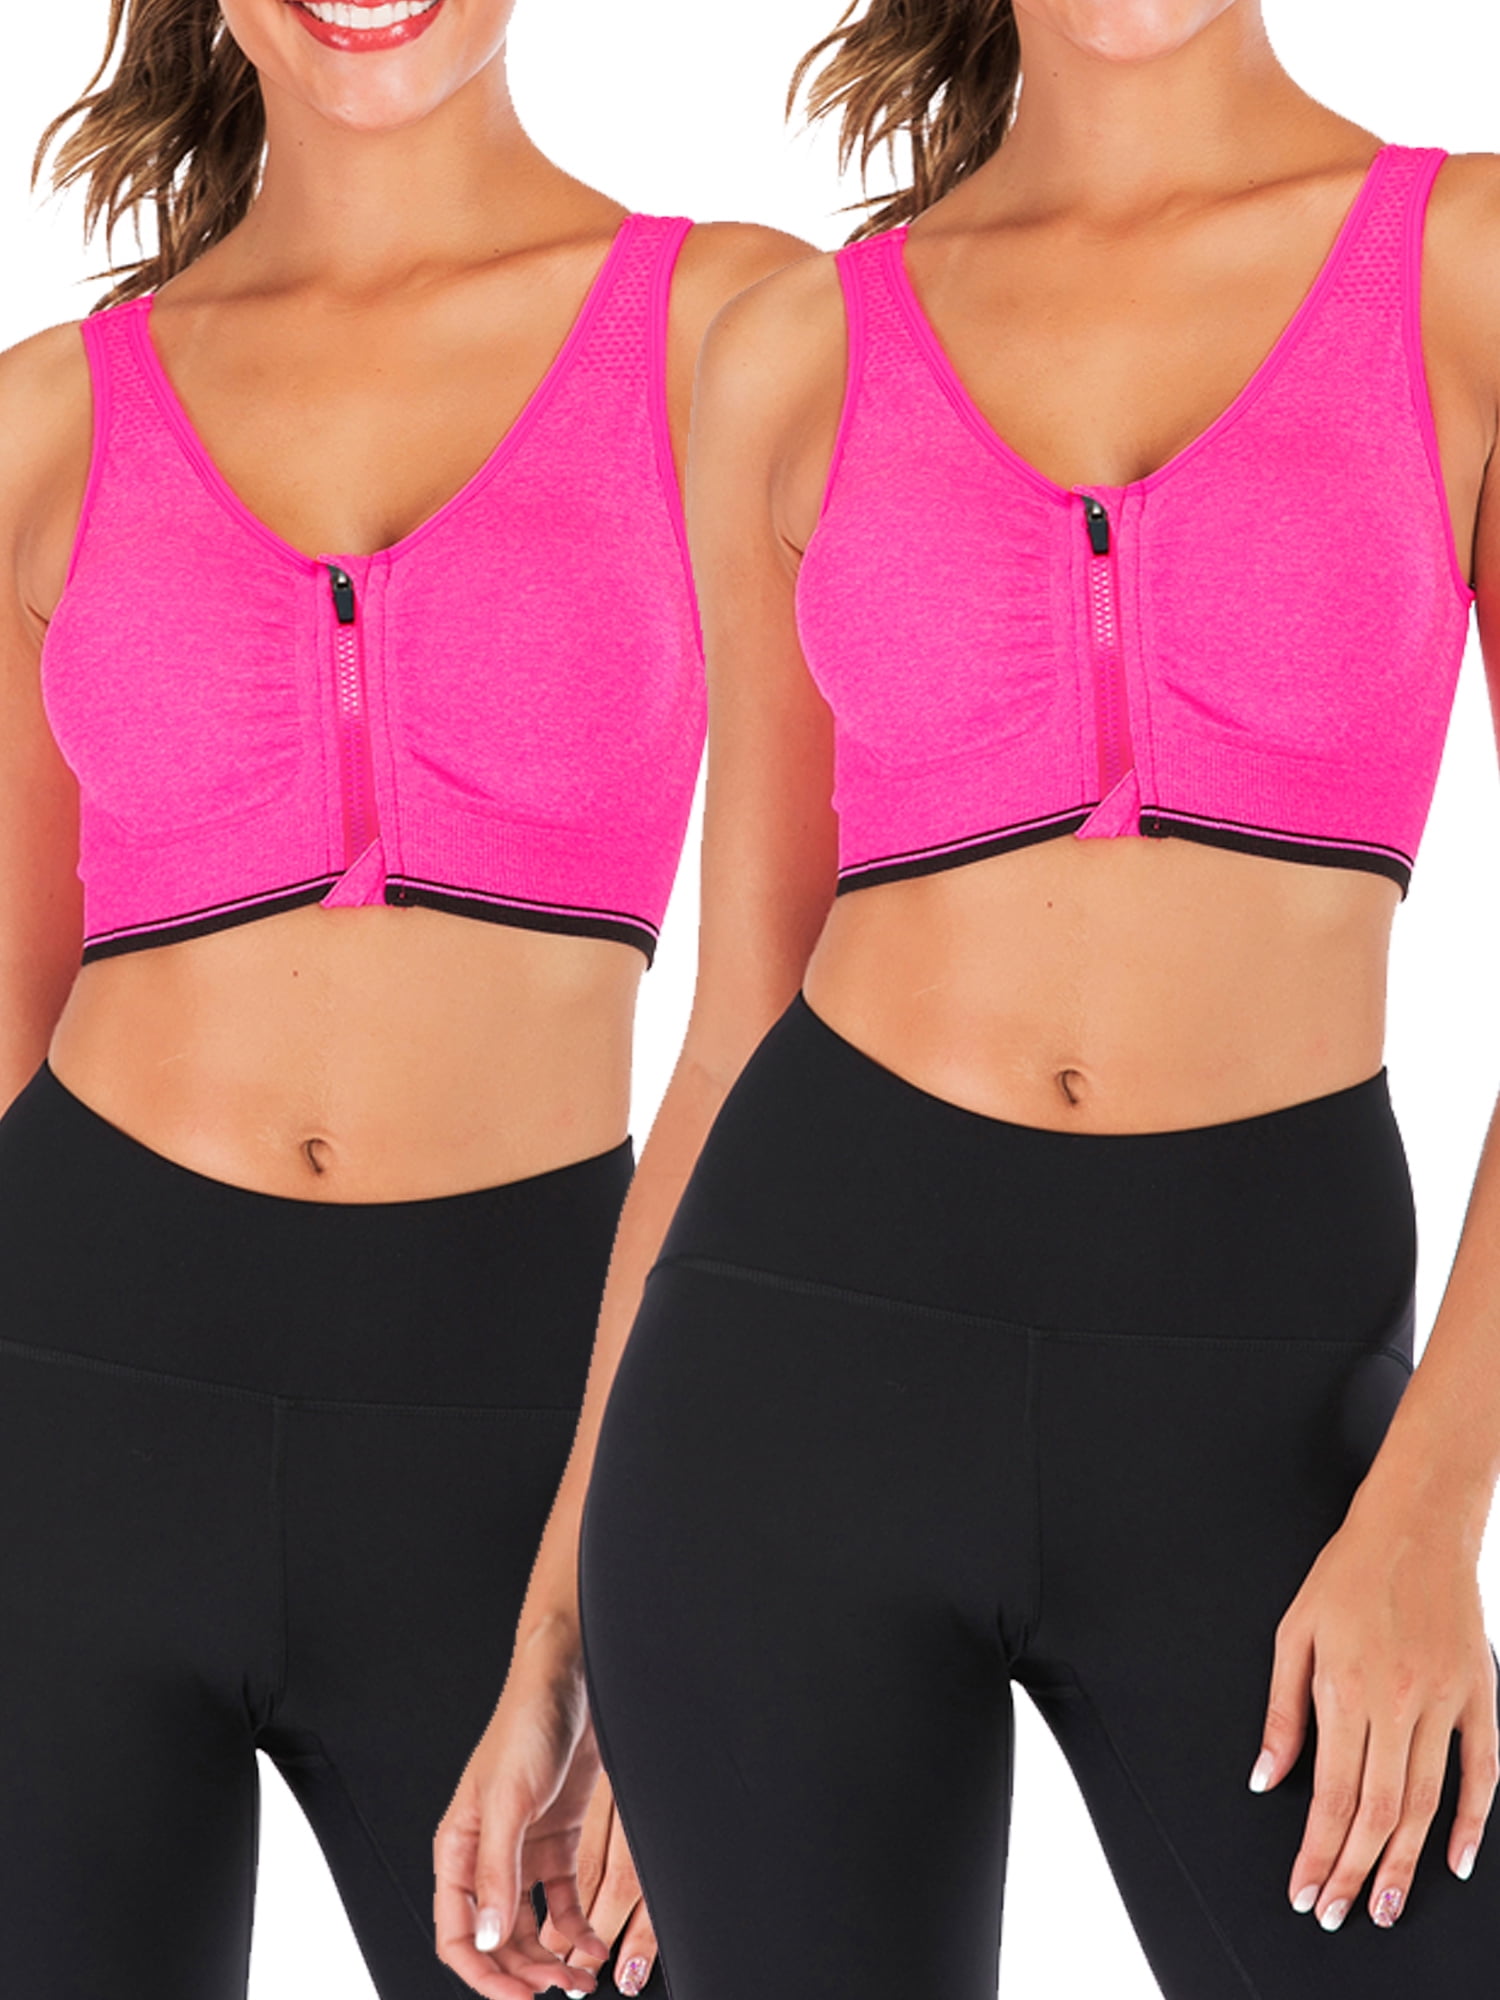 Ladies Padded Sports Bra Fitness Workout Running Yoga Stretch Camisole Bras